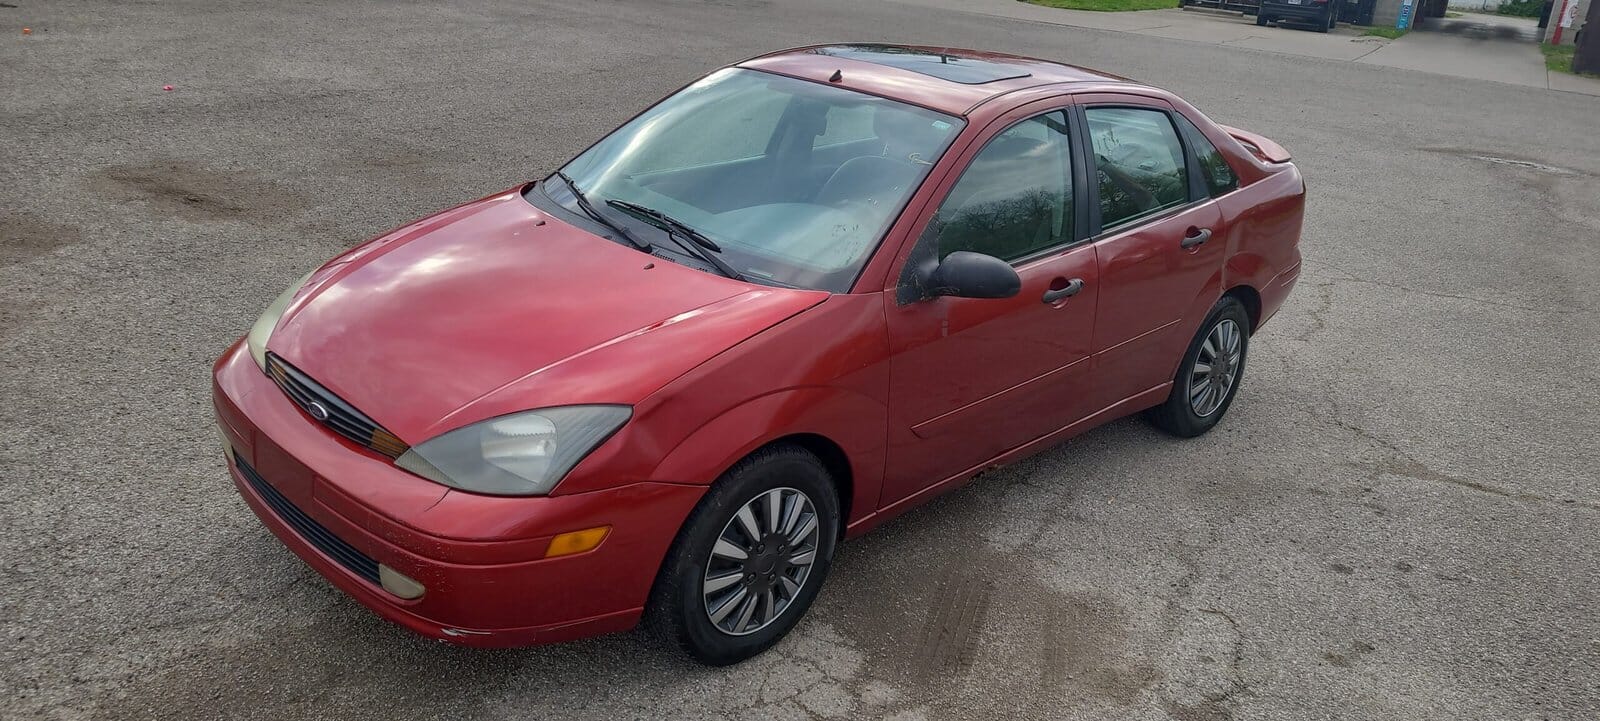 **SOLD**2002 Ford Focus ZTS**SOLD** full